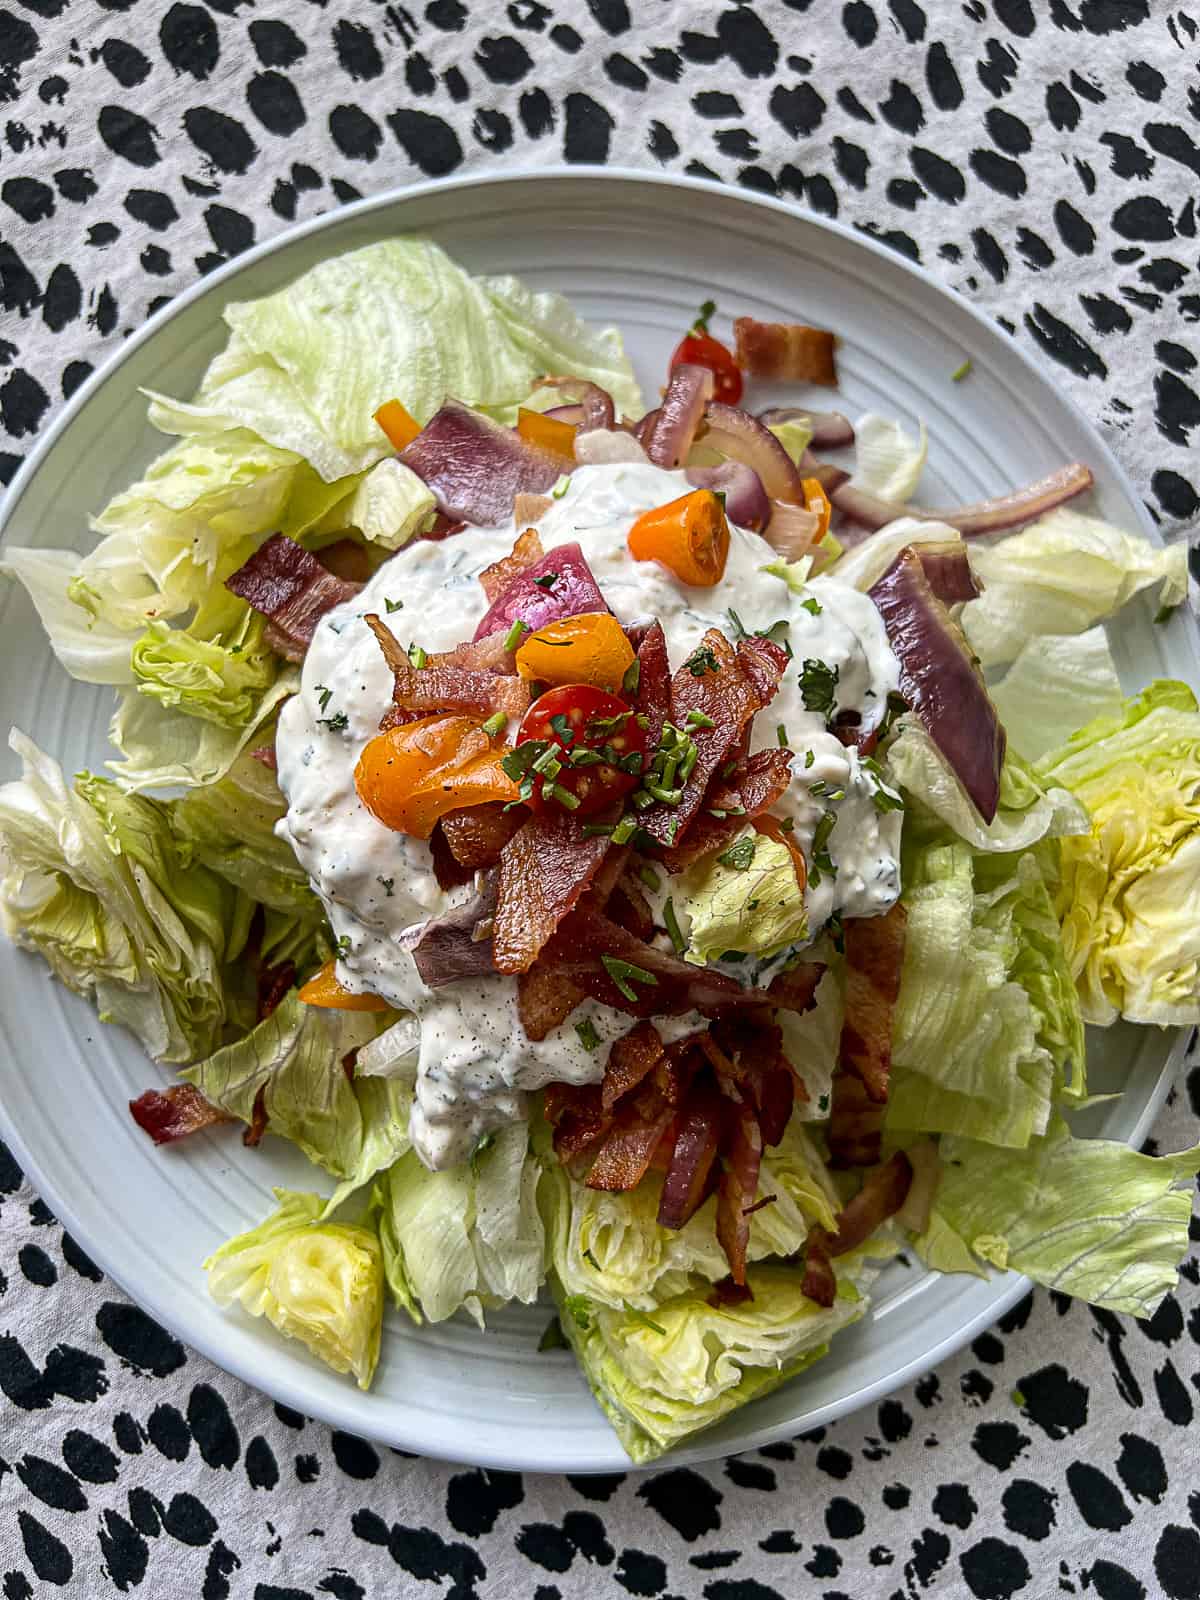 blue cheese dressing recipe on wedge salad